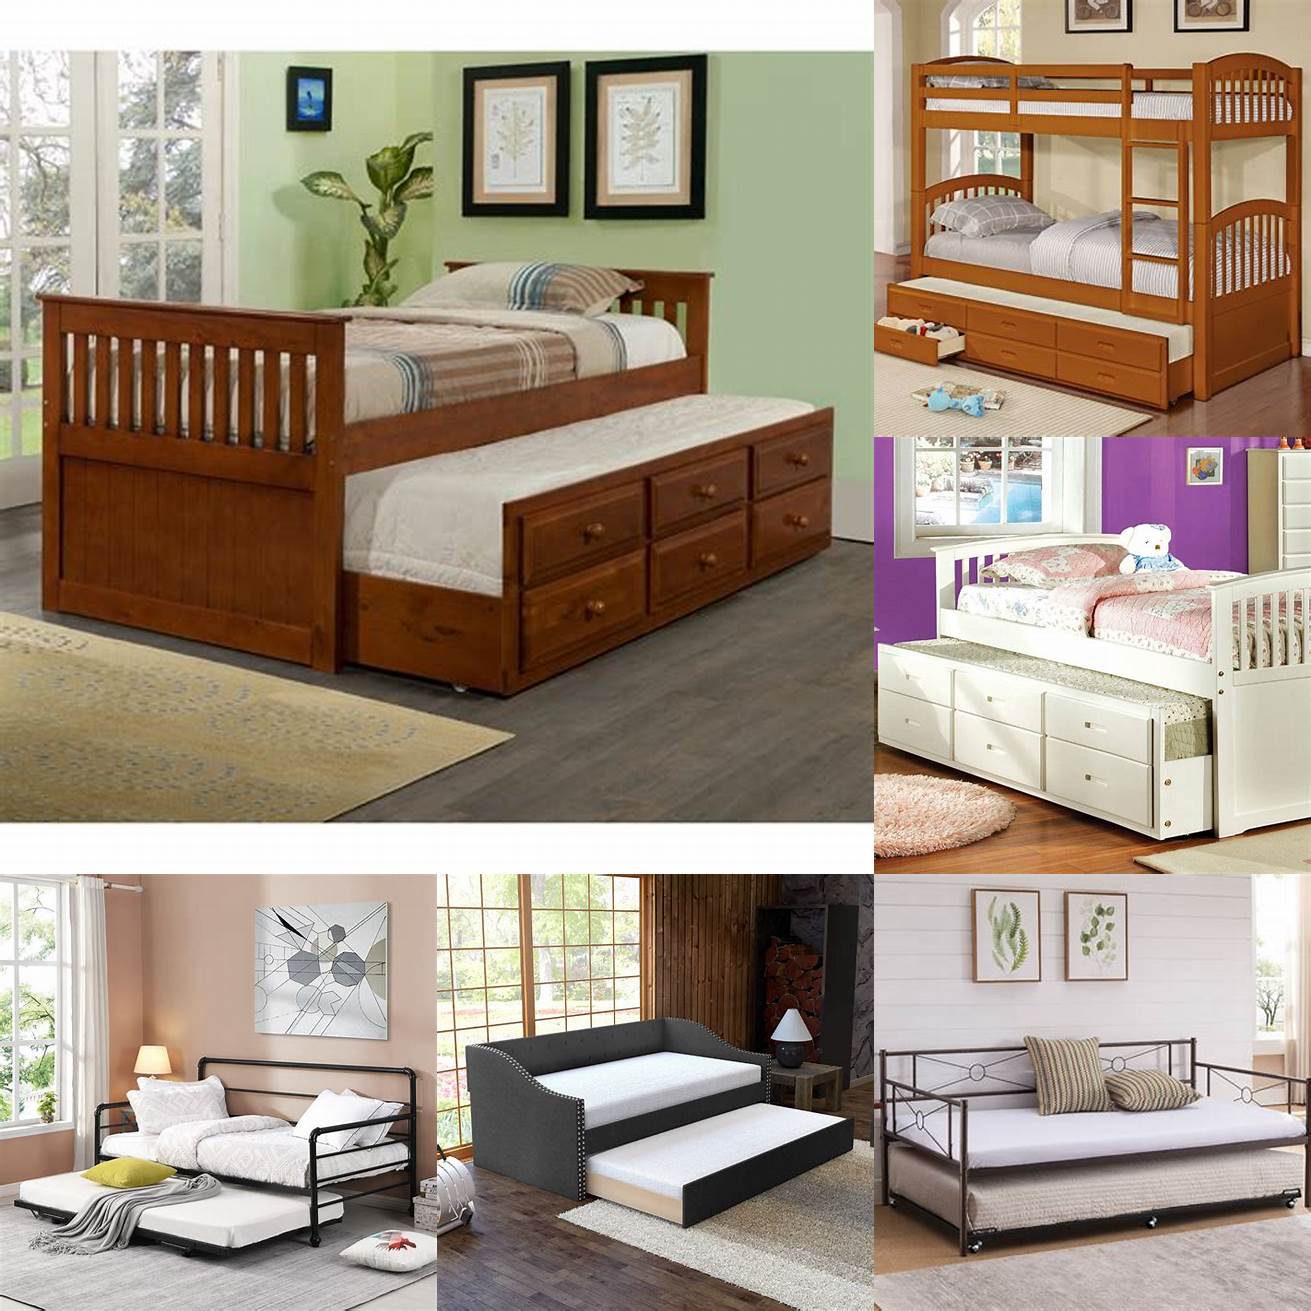 Price Twin beds with trundle come in various price ranges Set a budget and choose a bed that offers the most value for your money